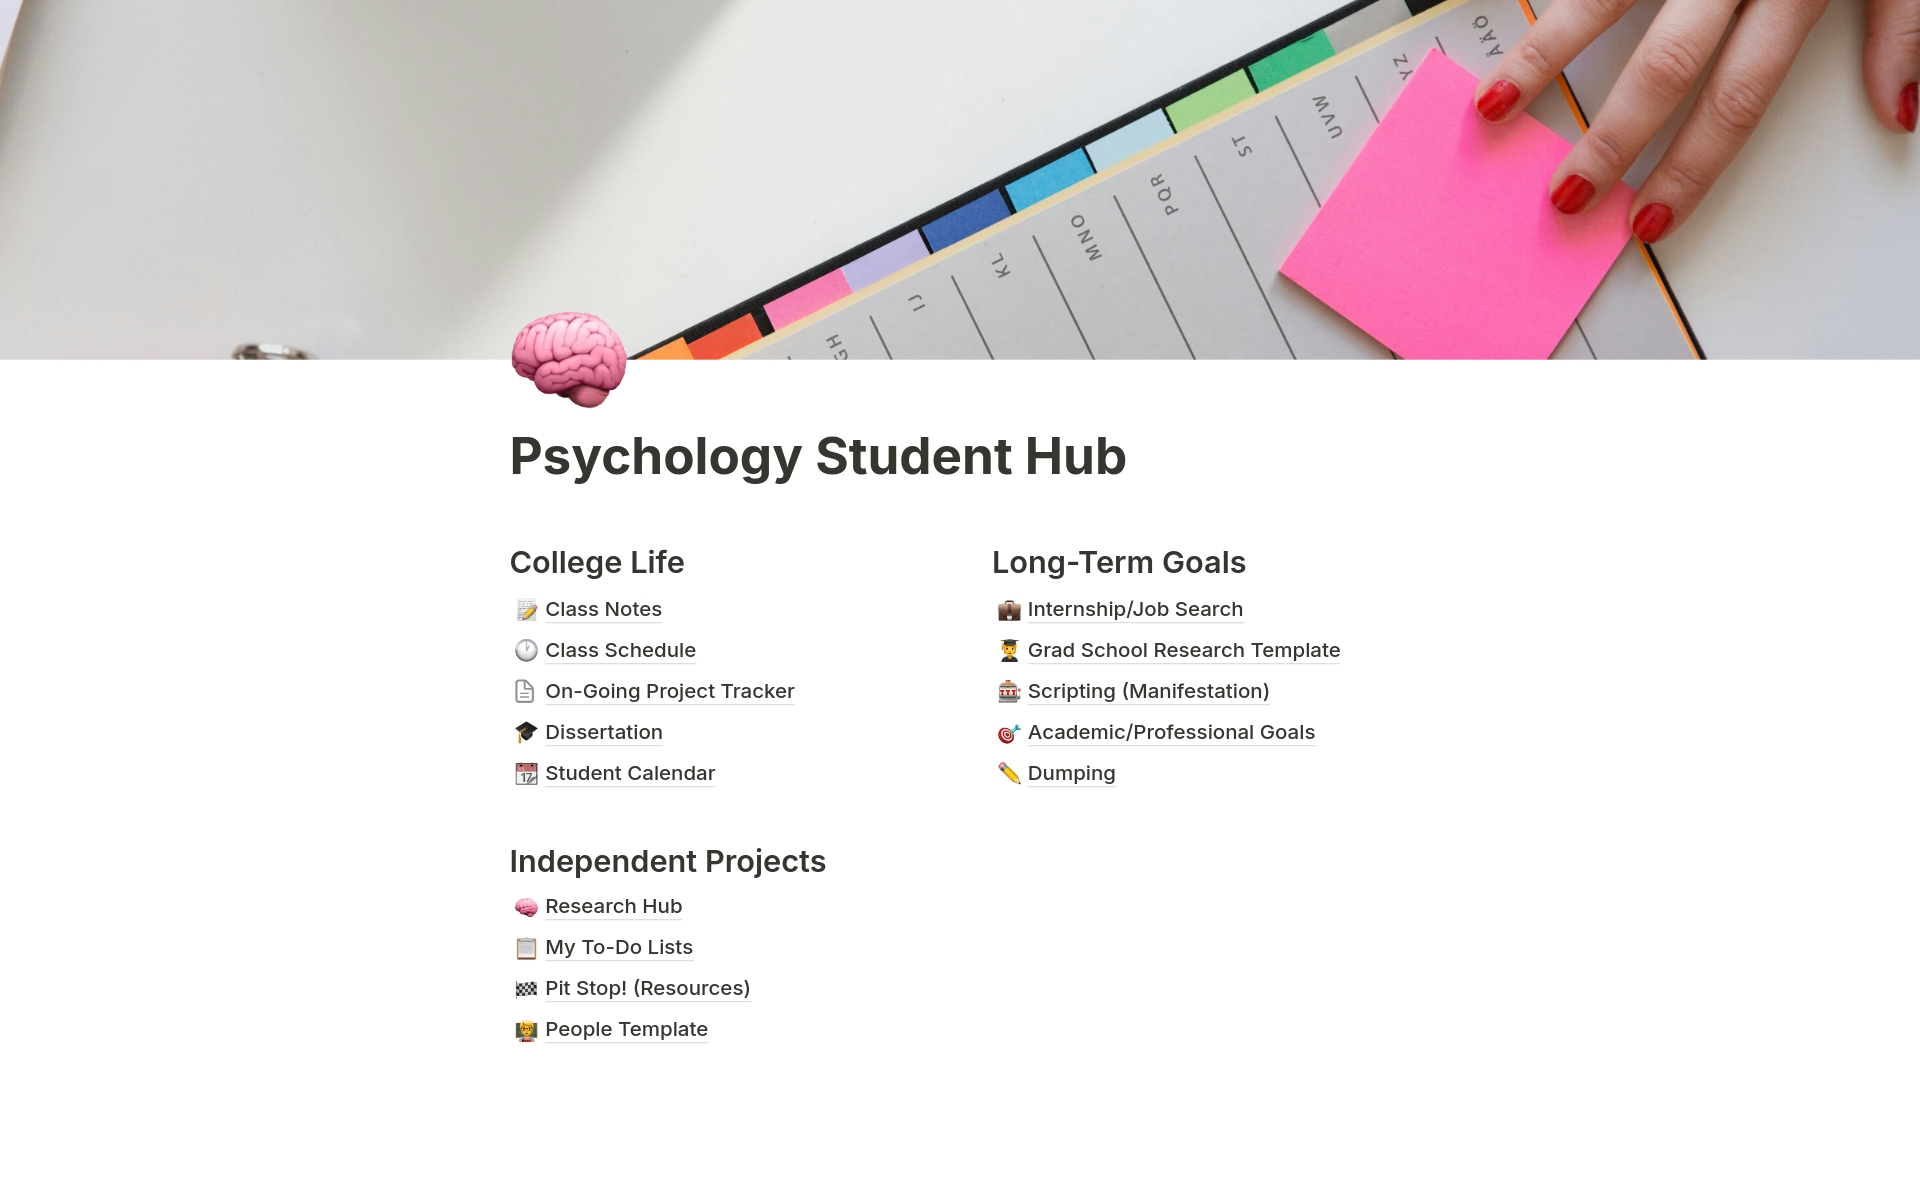 This template is the ultimate virtual space for Psychology students, that can be used for note-taking, scheduling, planning, and making your dreams turn into reality!